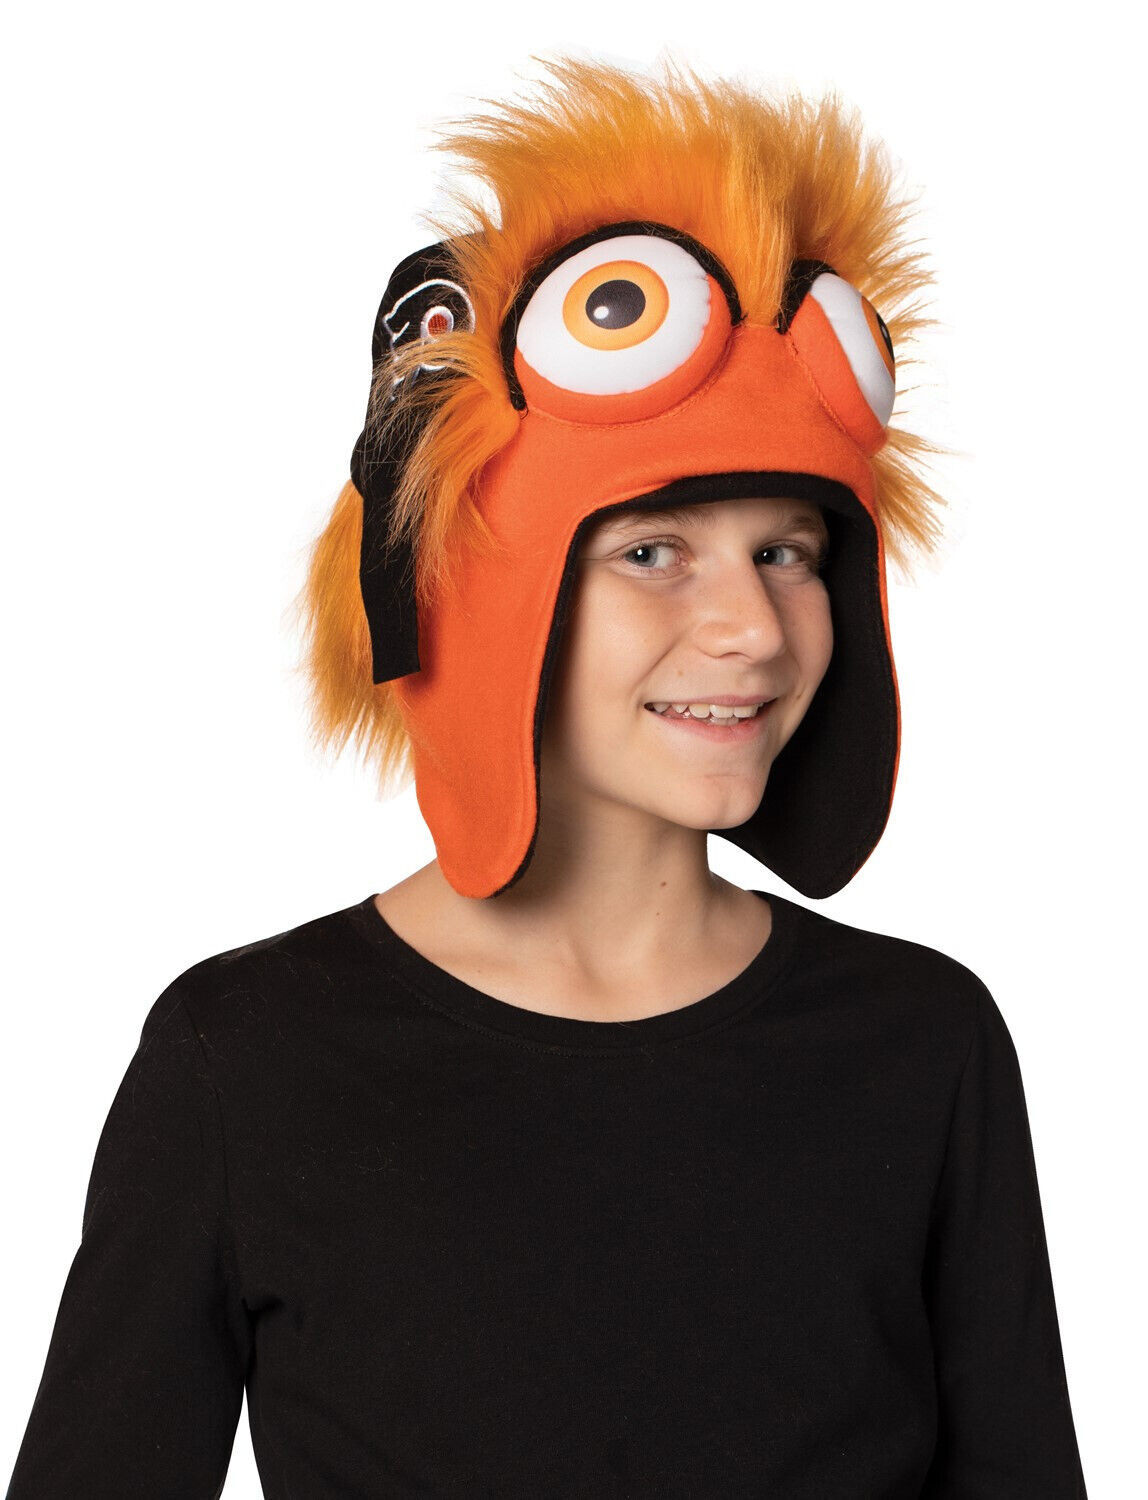 Primary image for Philadelphia Flyers NHL Mascot Gritty Plush Trapper Hat One Size Tween to Adult